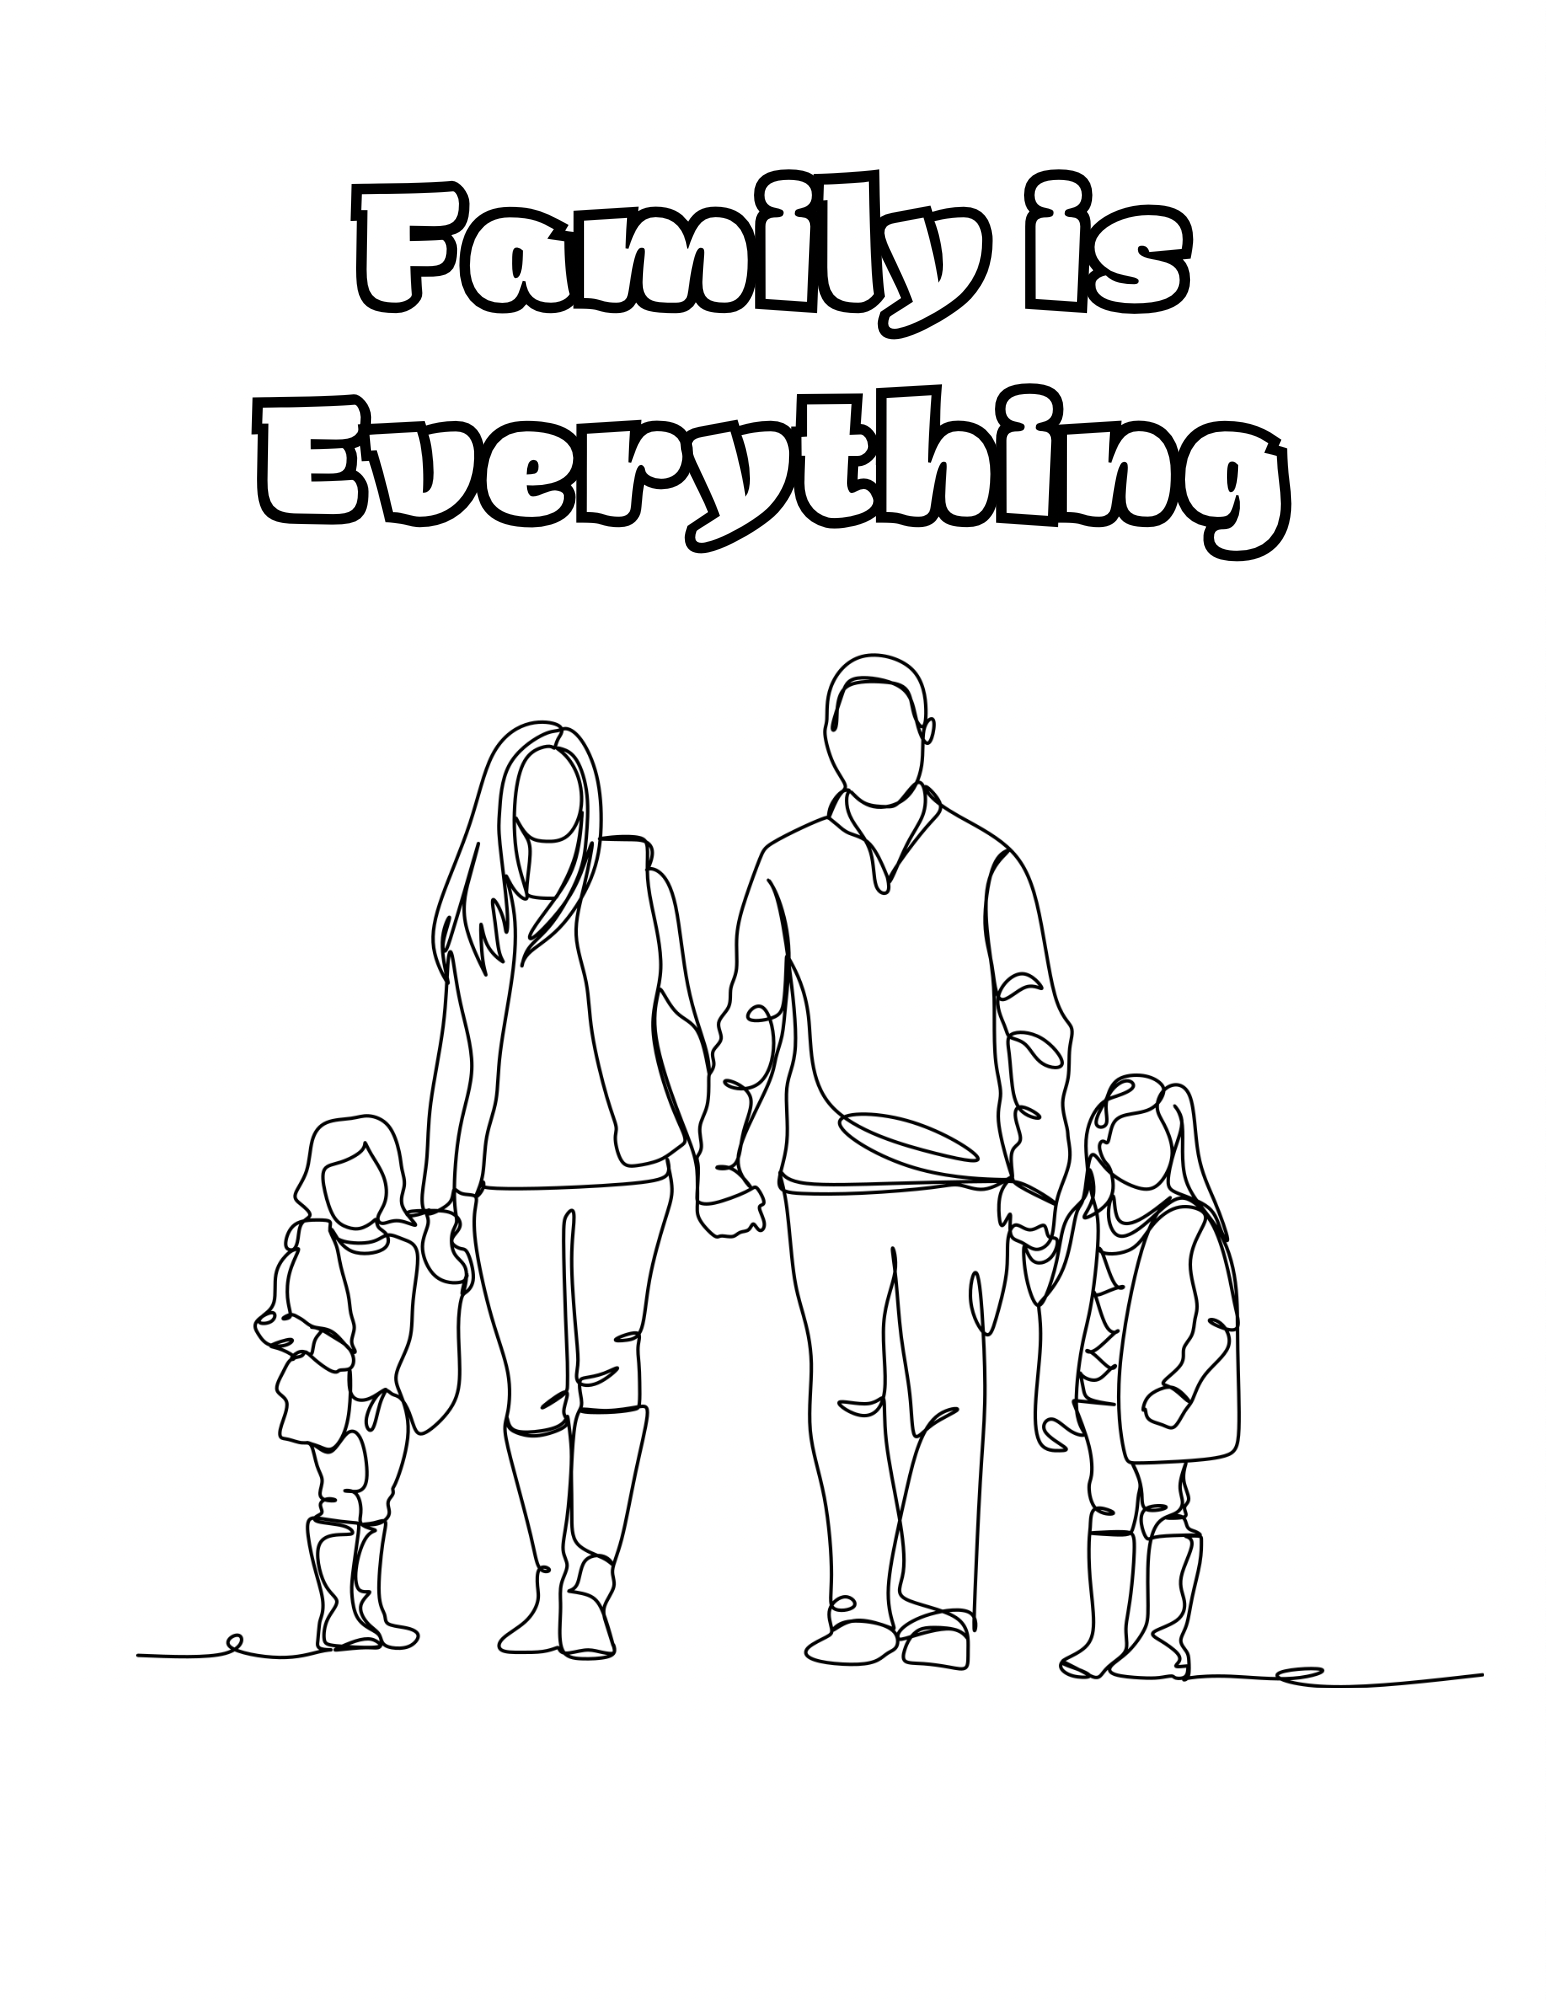 Family is Everything Coloring Sheet (Download Here)